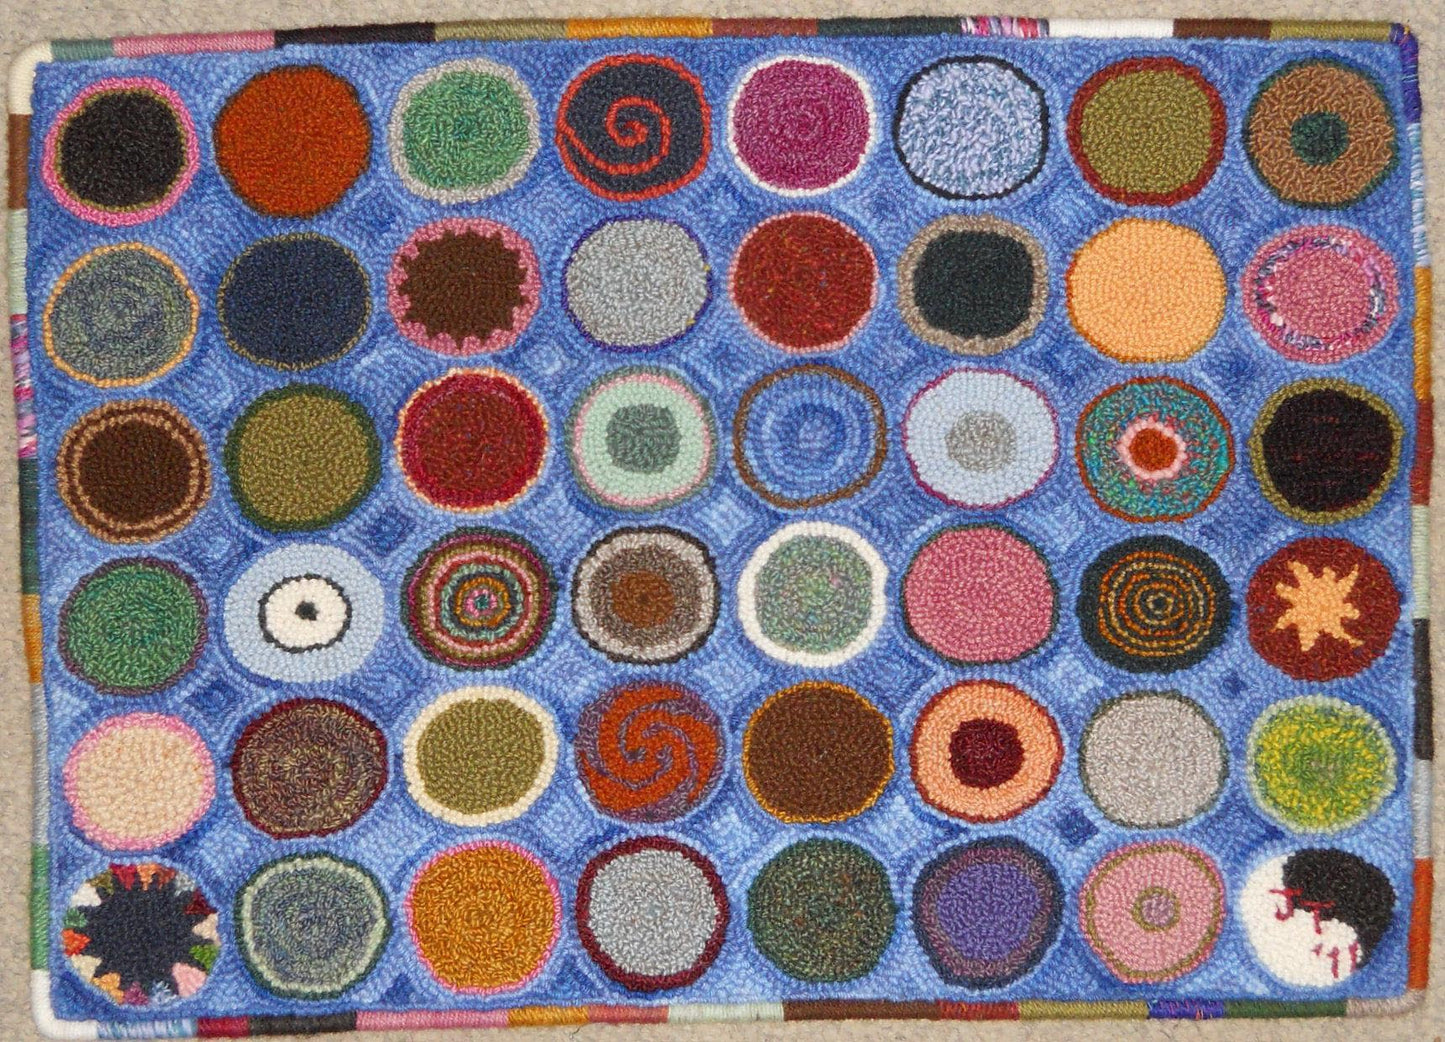 Penny Rug Small, 21"x28.5"